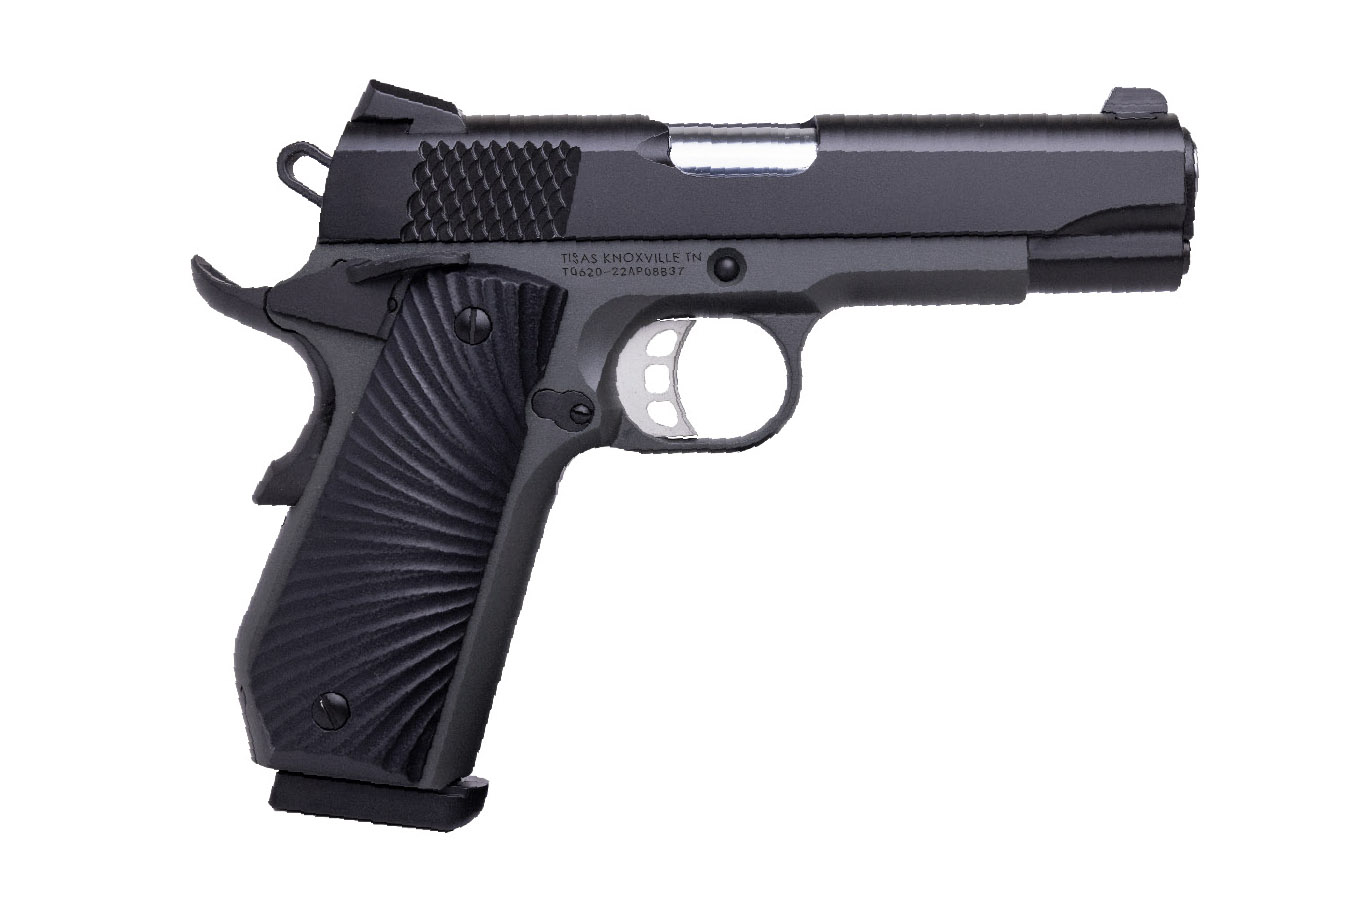 CARRY 1911 ED BROWN BOBTAIL 45 ACP 4.25 IN BBL